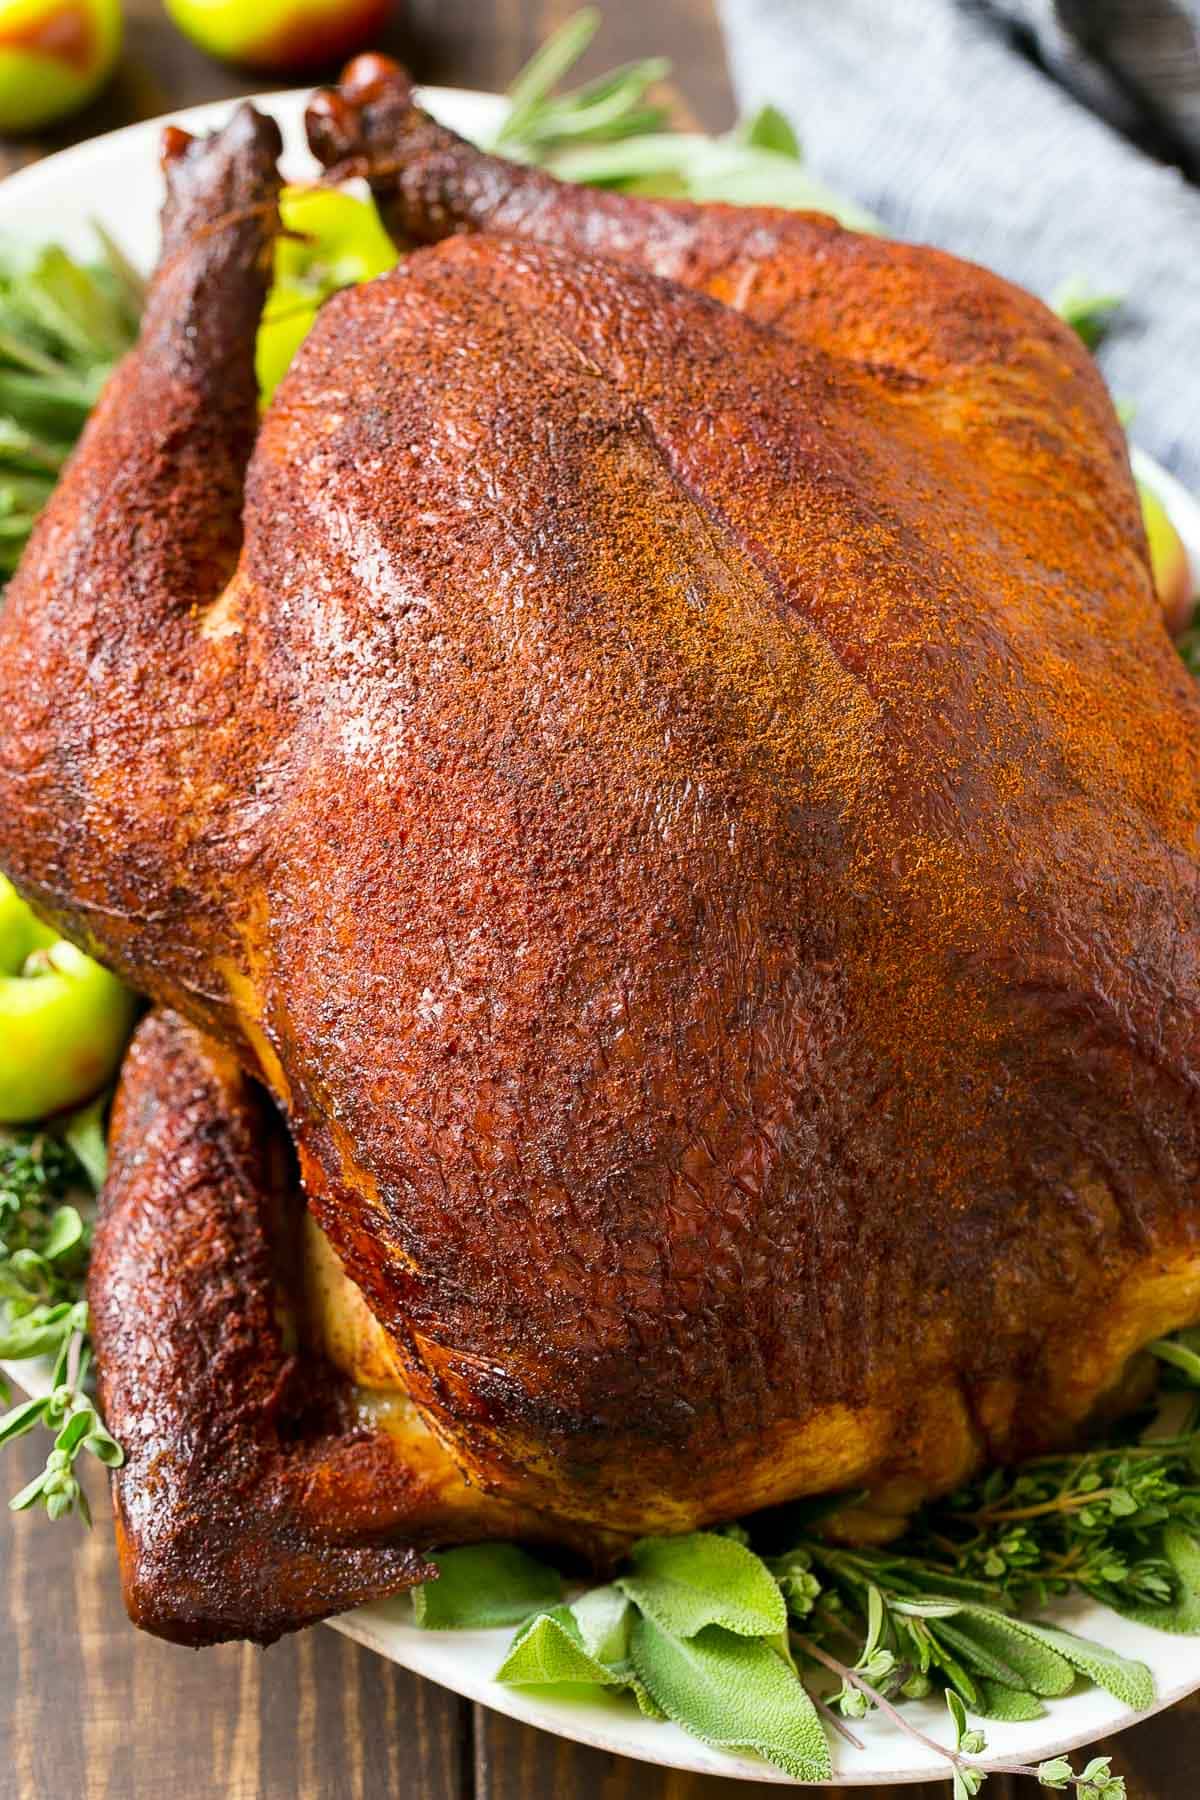 A whole smoked turkey garnished with herbs.